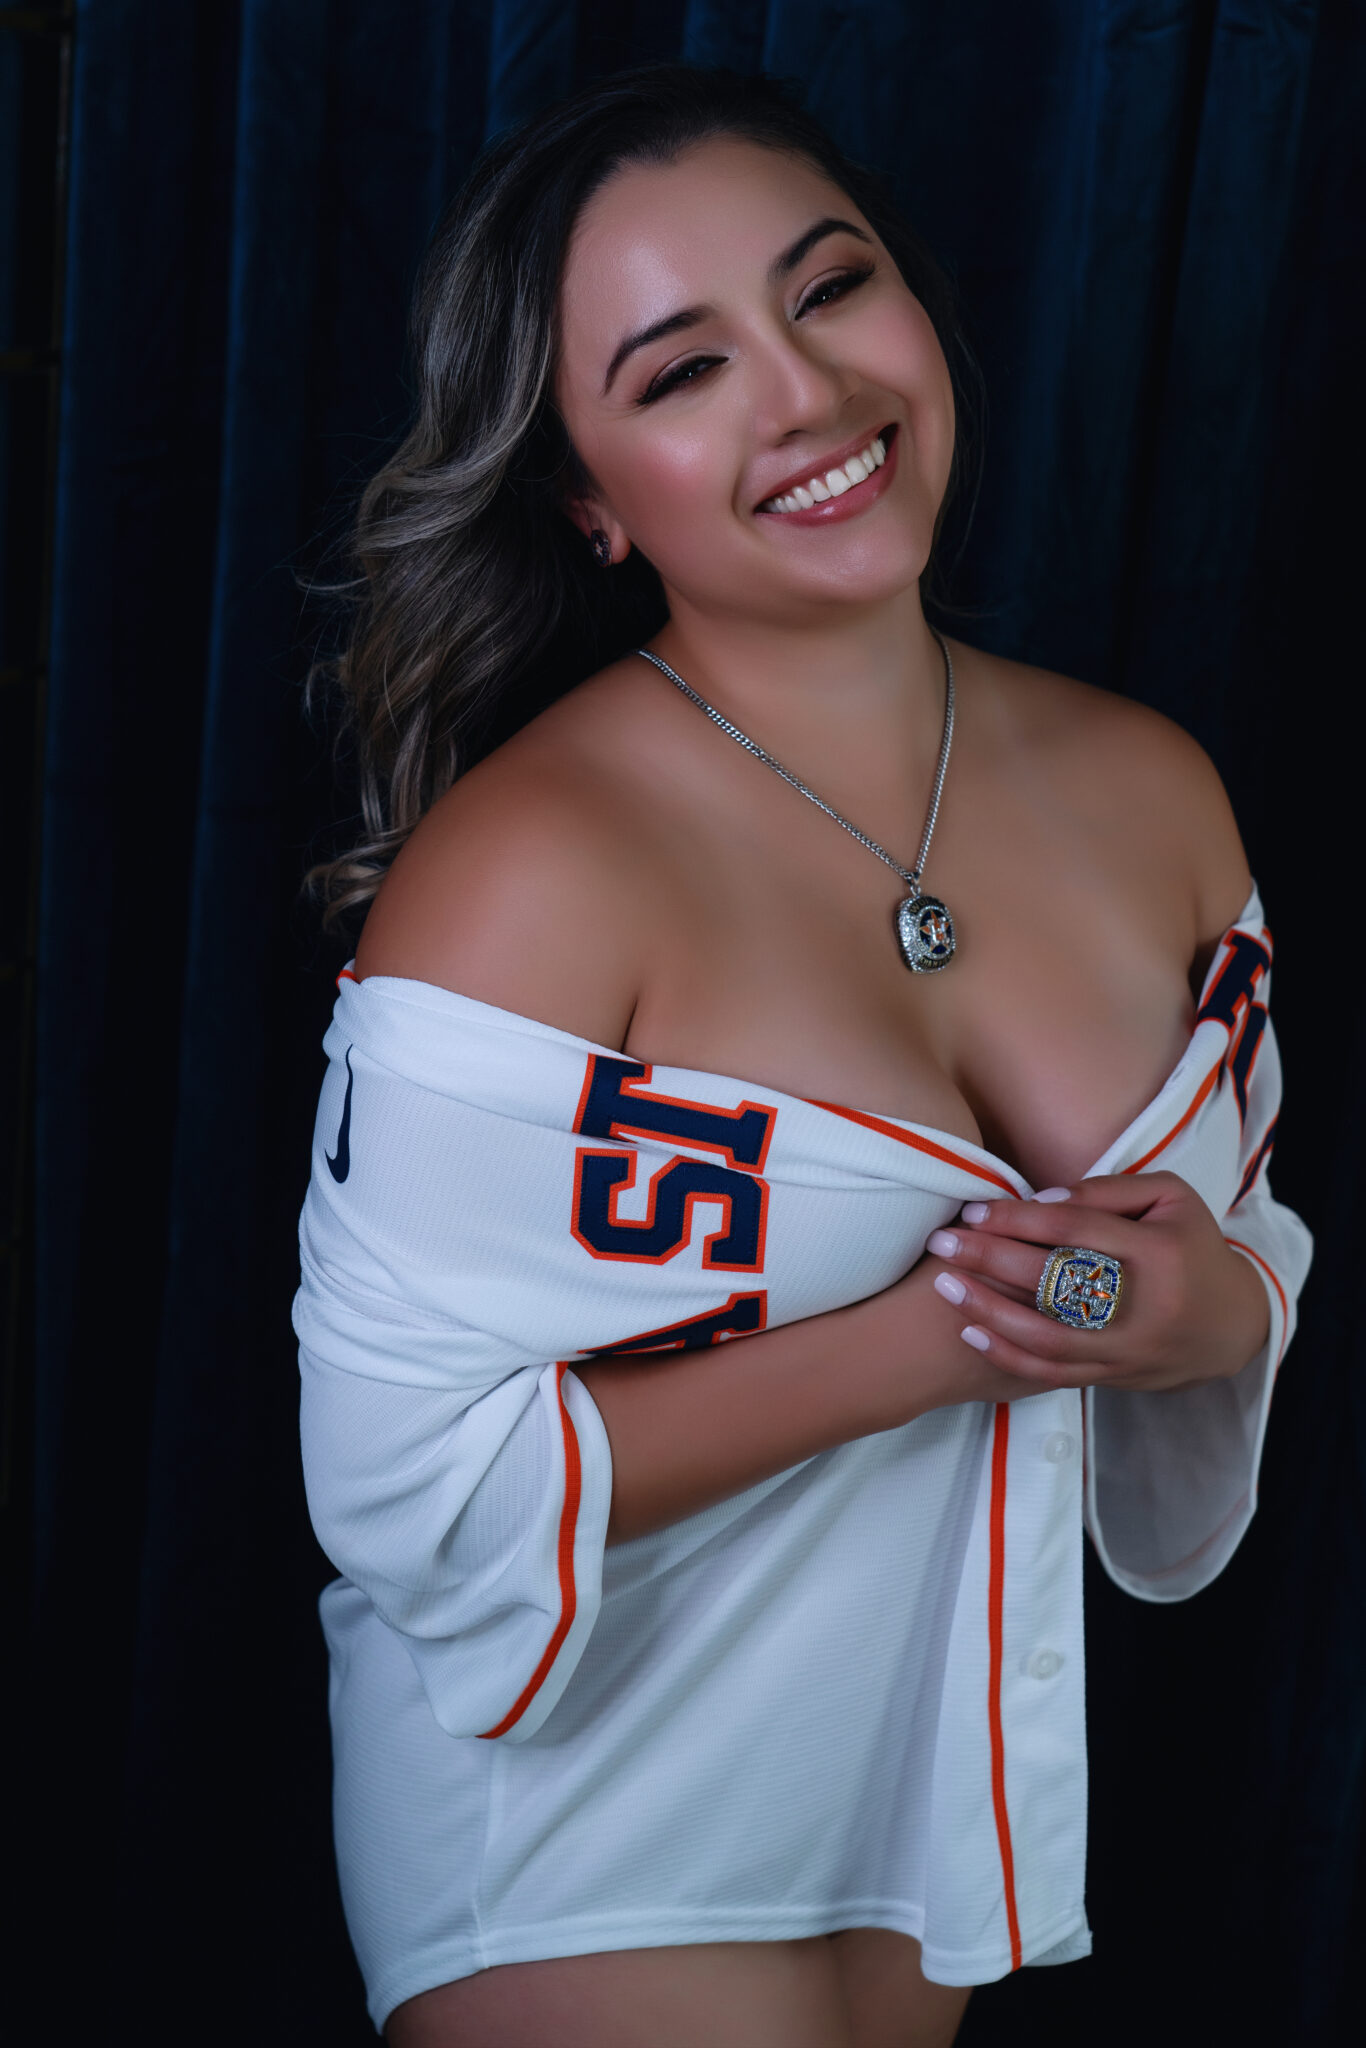 A woman in a baseball shirt is posing for a photo as part of Northern Virginia Boudoir Photography.